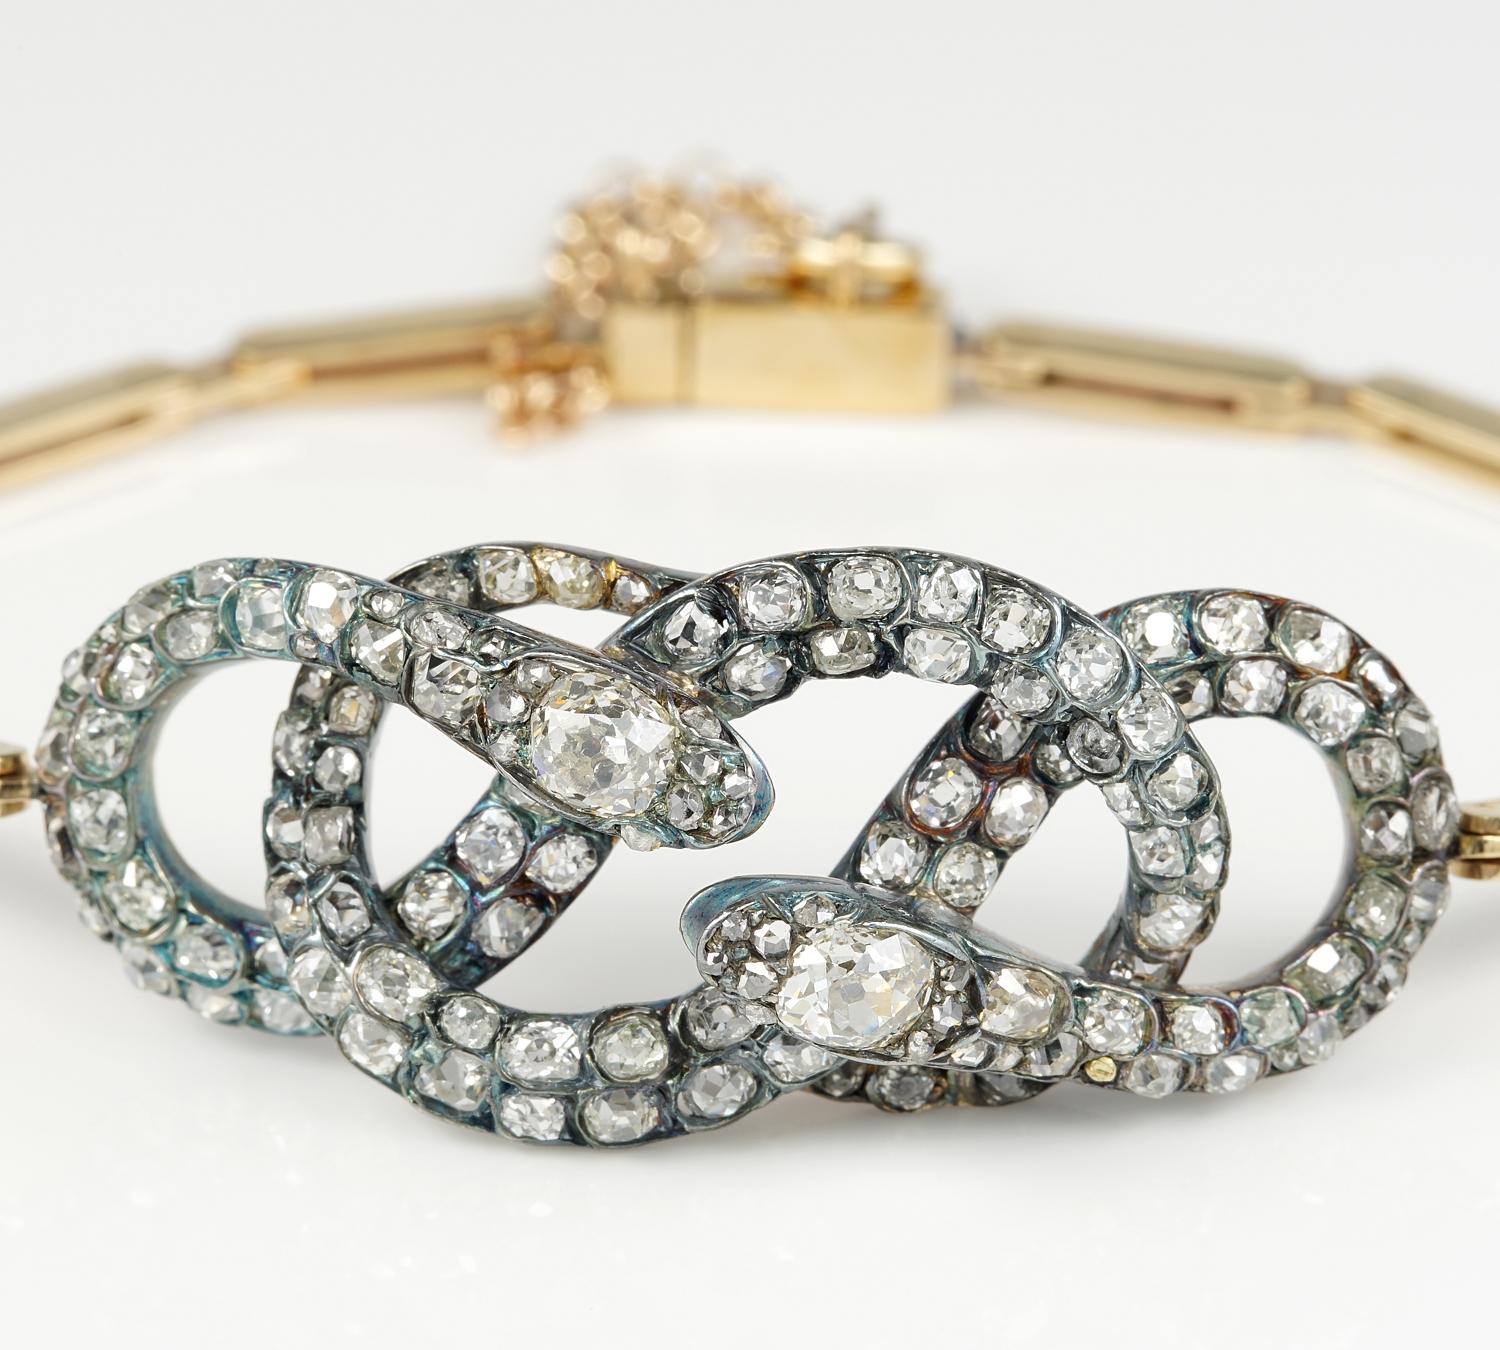 This extremely beautiful, rare Victorian bracelet is a joy to admire as survivor of Victorian Period jewellery.
Glorious workmanship of the time, hand crafted of solid 15 Kt gold tested with silver top as used during the period.
The beautiful main